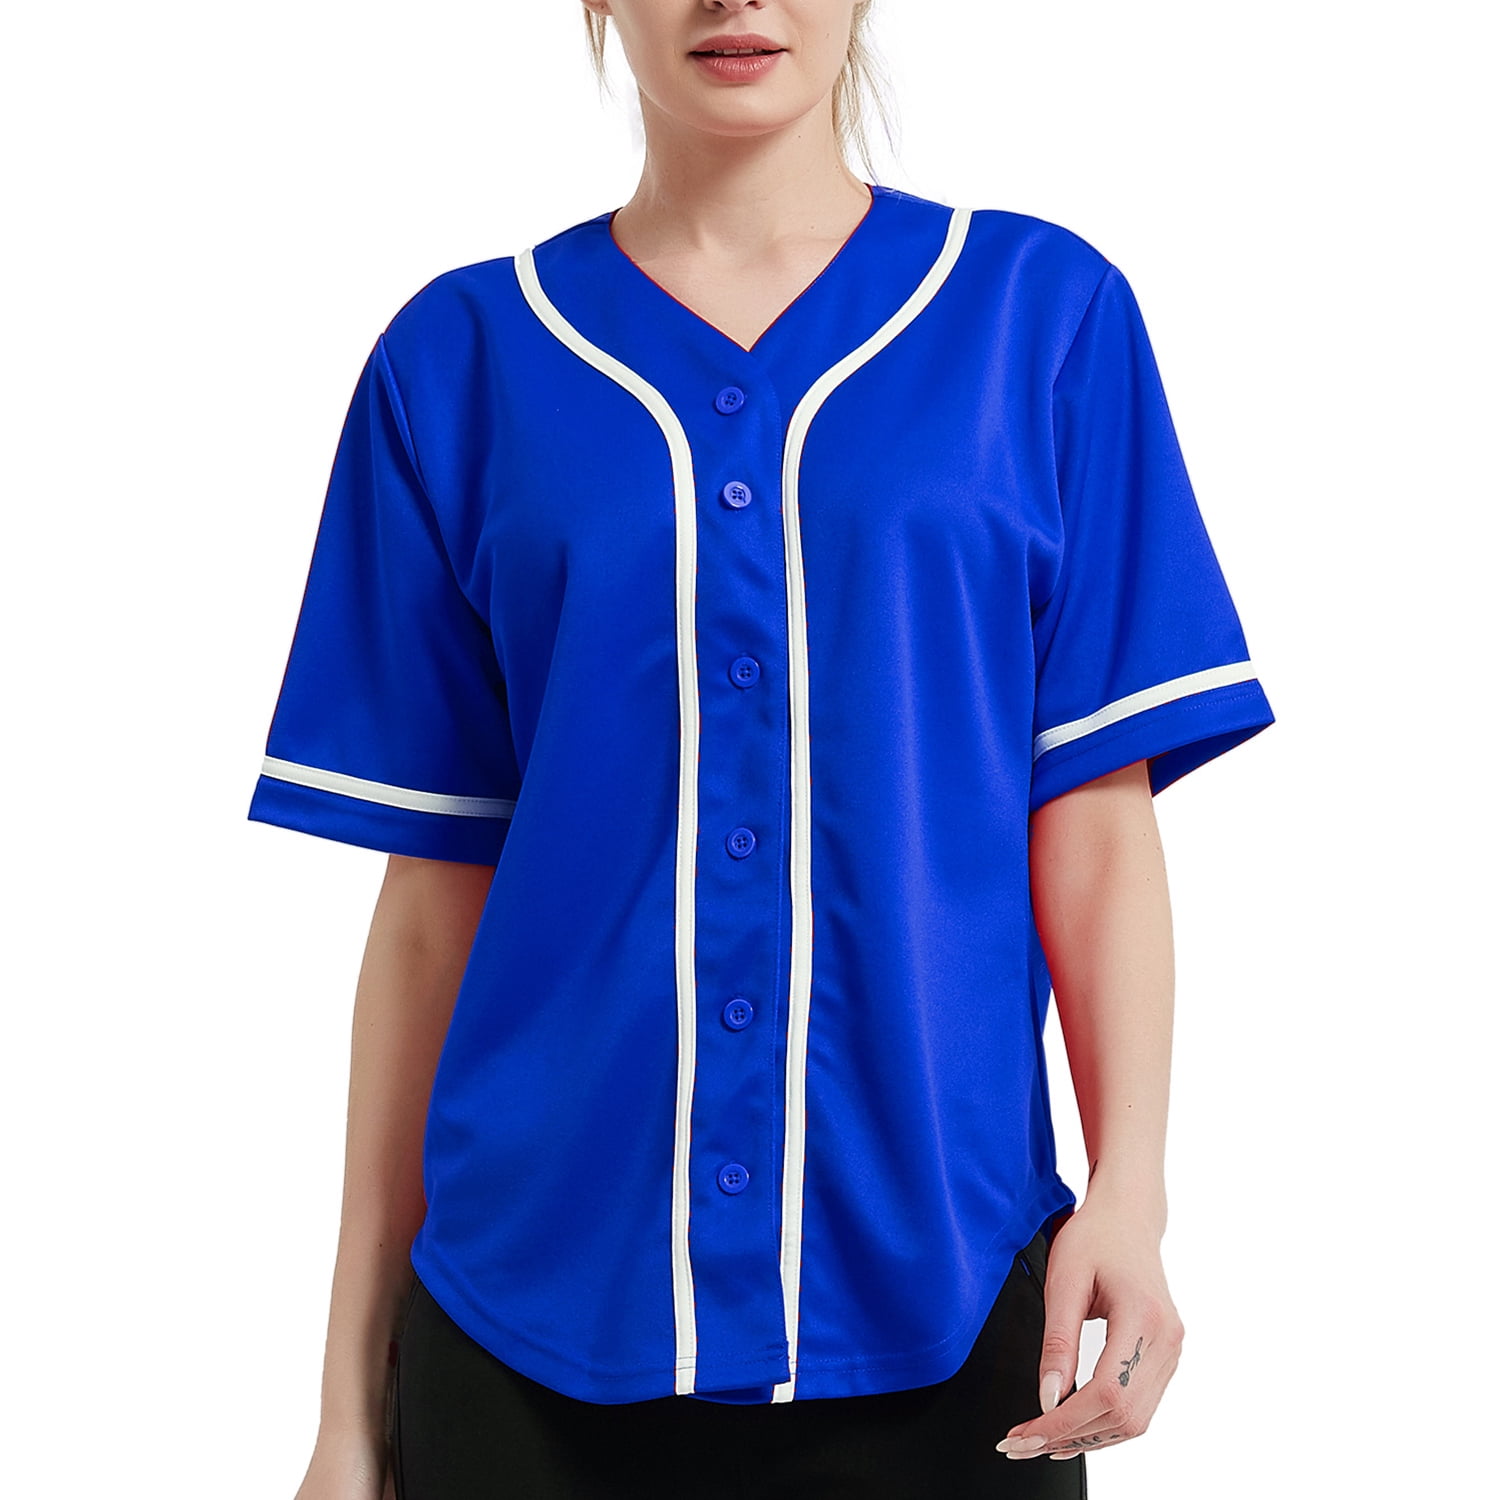 Fashion Blank Baseball Jersey Plain Button-Down Breathable Soft Tee Shirts  for Men/Kids Outdoors Game/Party Big size Any Color - AliExpress